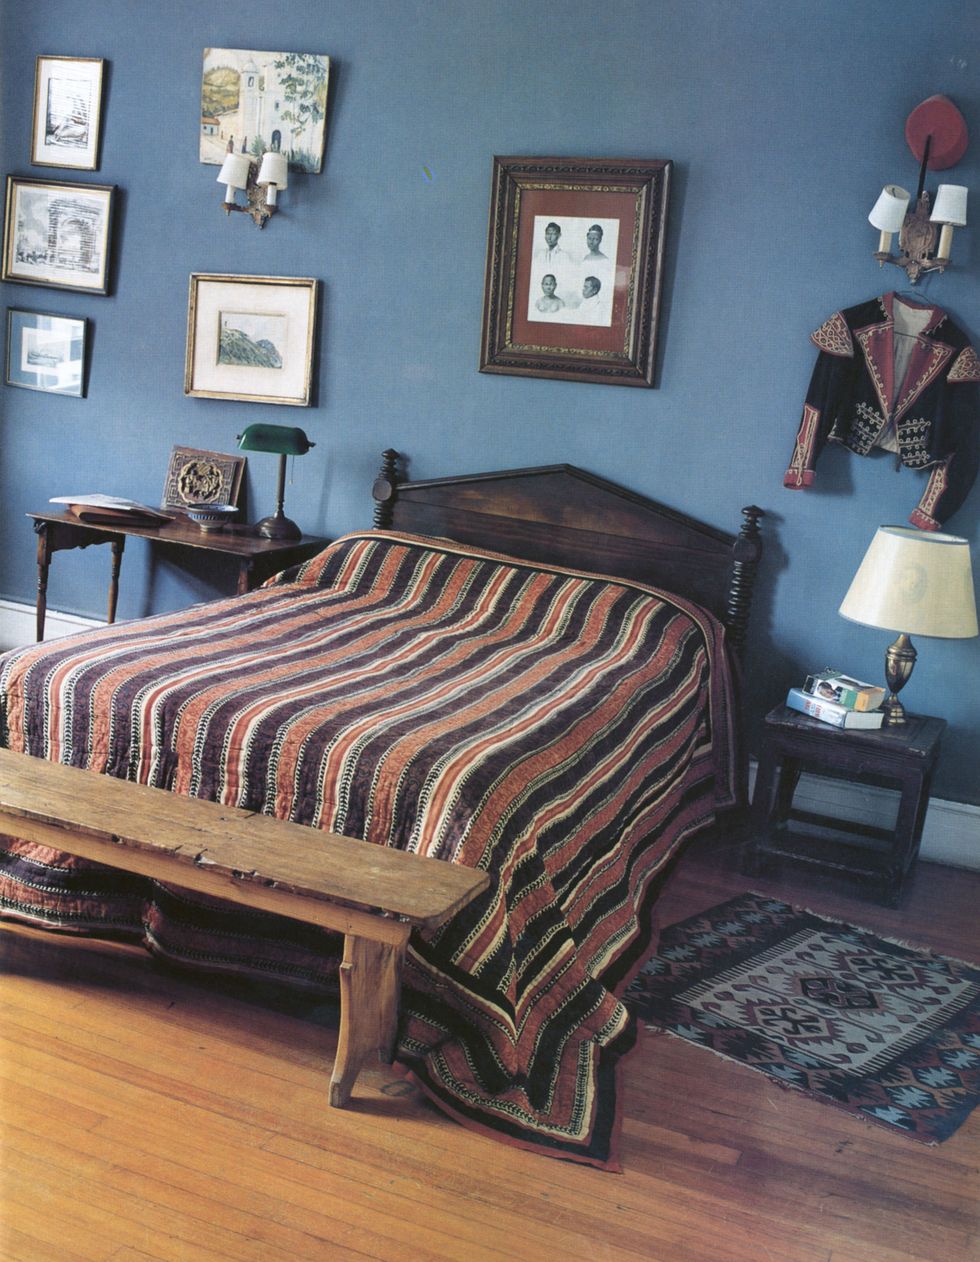 blue painted bedroom with objects hanging from the wall including a studded embroidered matador jacket and some frames and a rustic bench and striped bedcover